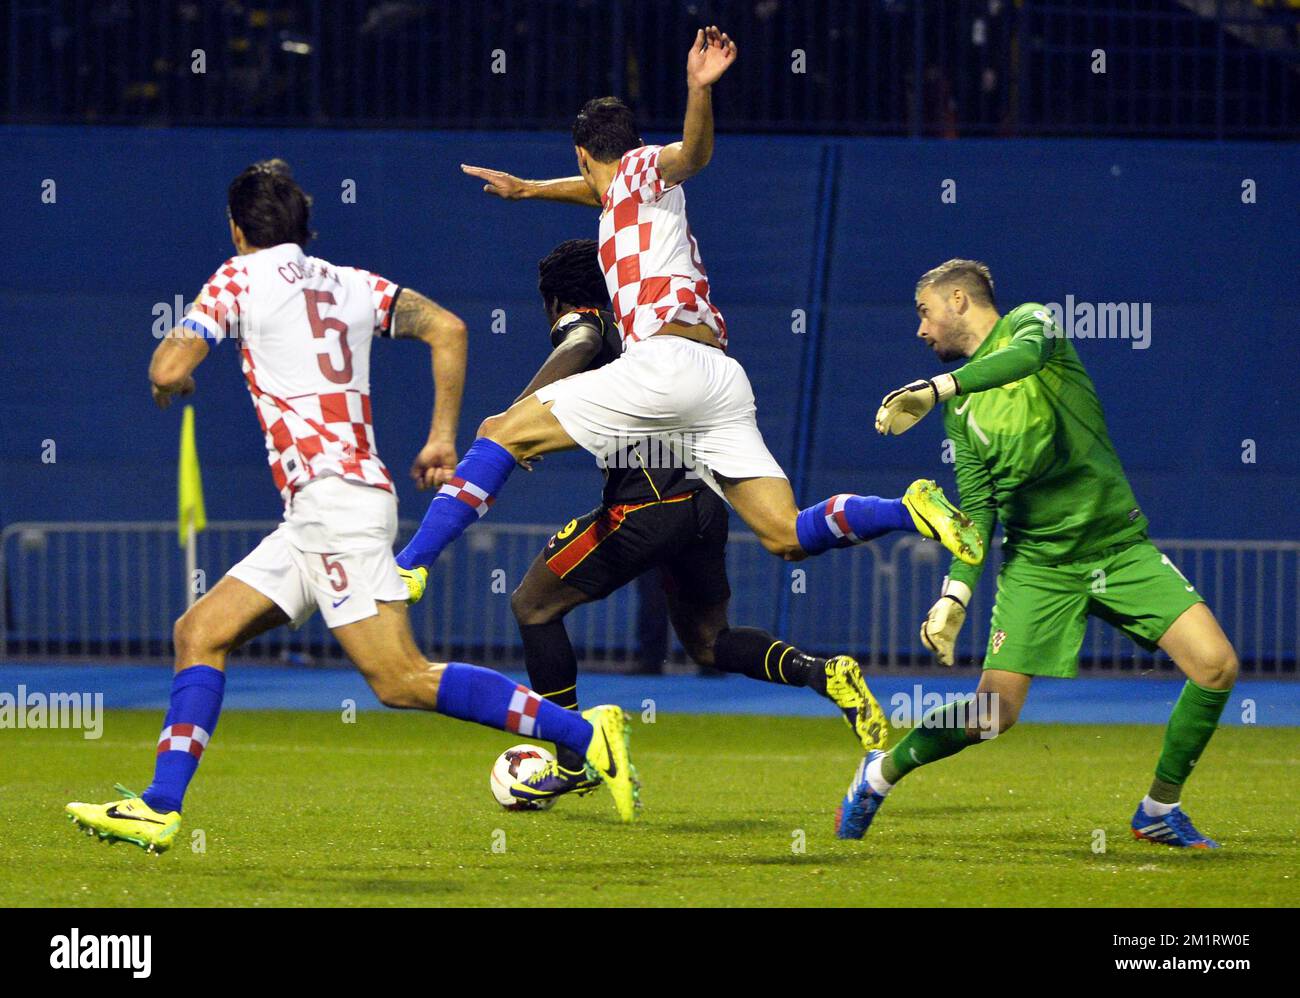 20131011 - ZAGREB, CROATIA: Belgium's Romelu Lukaku passes Croatia's goalkeeper Stipe Pletikosa and scores the 0-1 goal during a soccer game between Belgian national team The Red Devils and the Croatian national team in the Maksimir stadium in Zagreb, Croatia, Friday 11 October 2013, a qualification game for the 2014 FIFA World Cup. With two games to play the Red Devils are leading group A, they need one more point to qualify for the World Cup as group winner.   BELGA PHOTO ERIC LALMAND Stock Photo